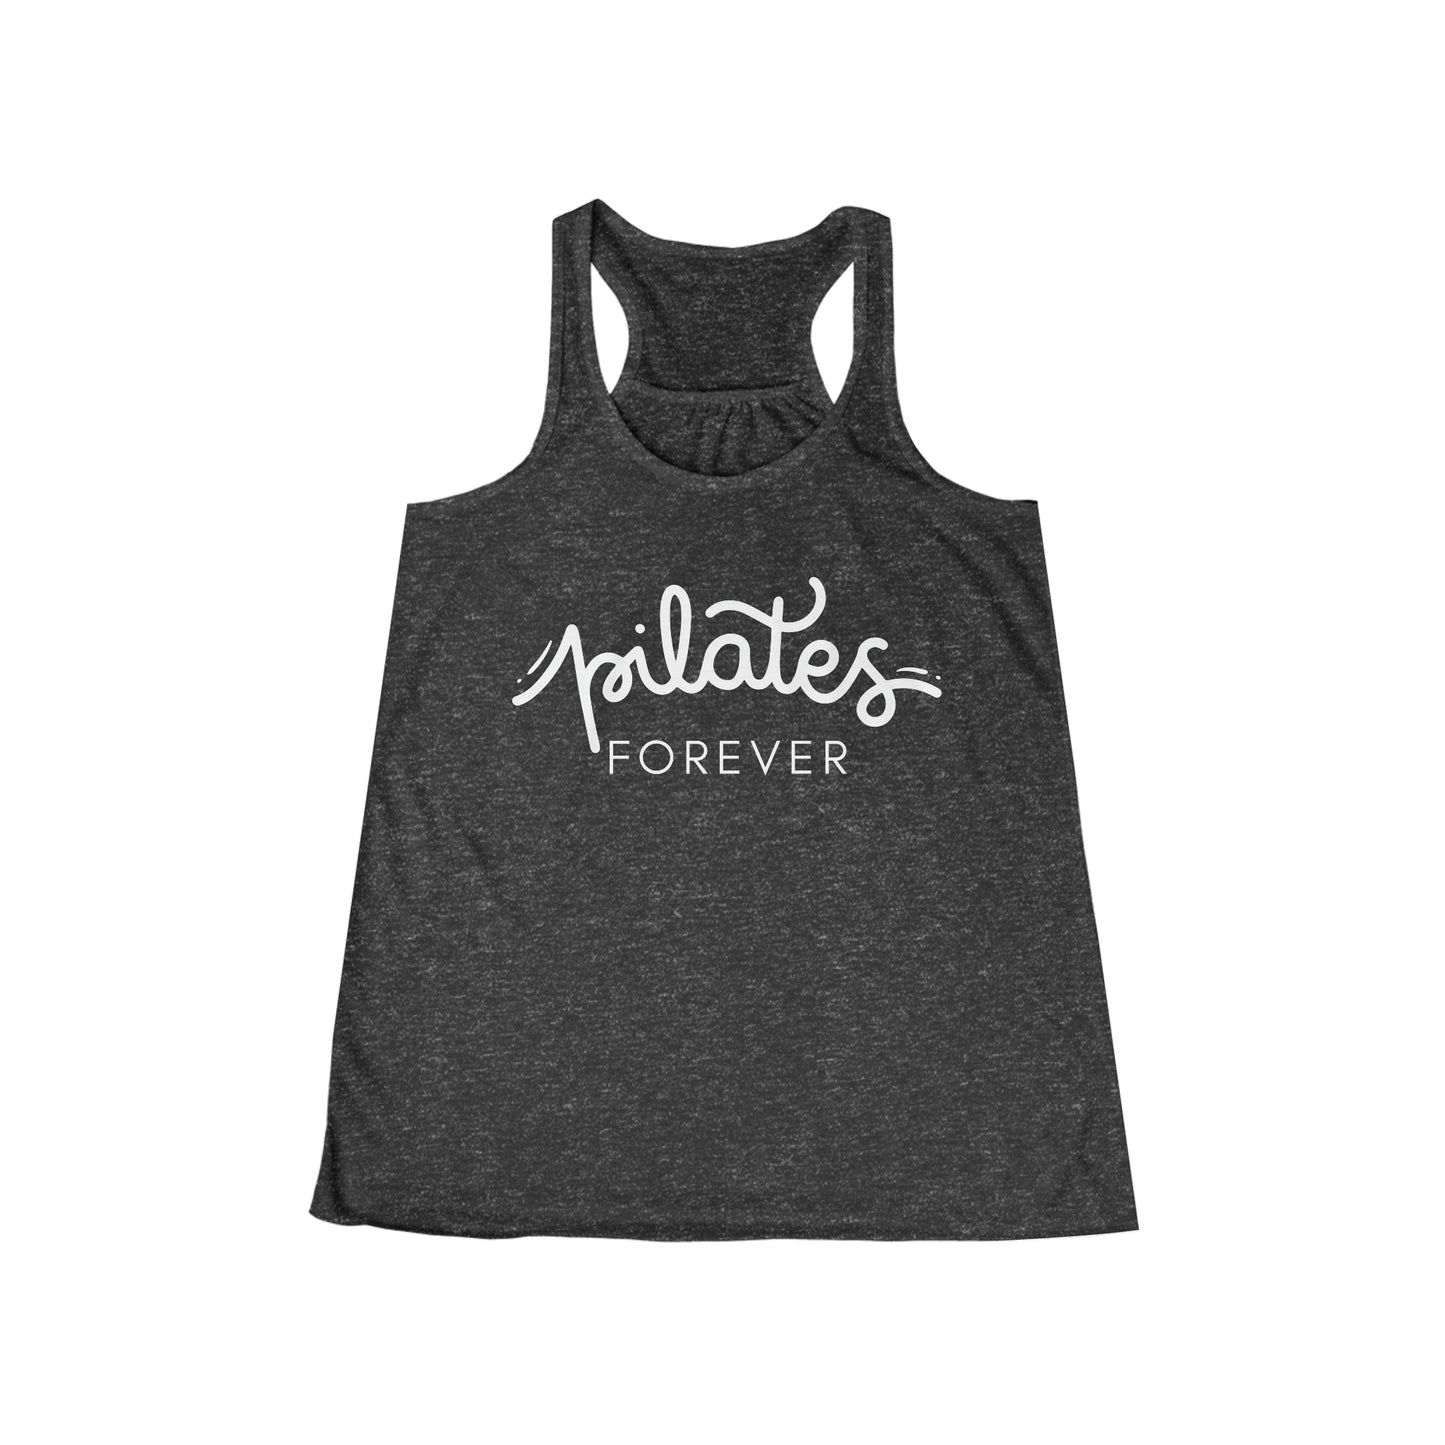 Pilates Forever Tank Top